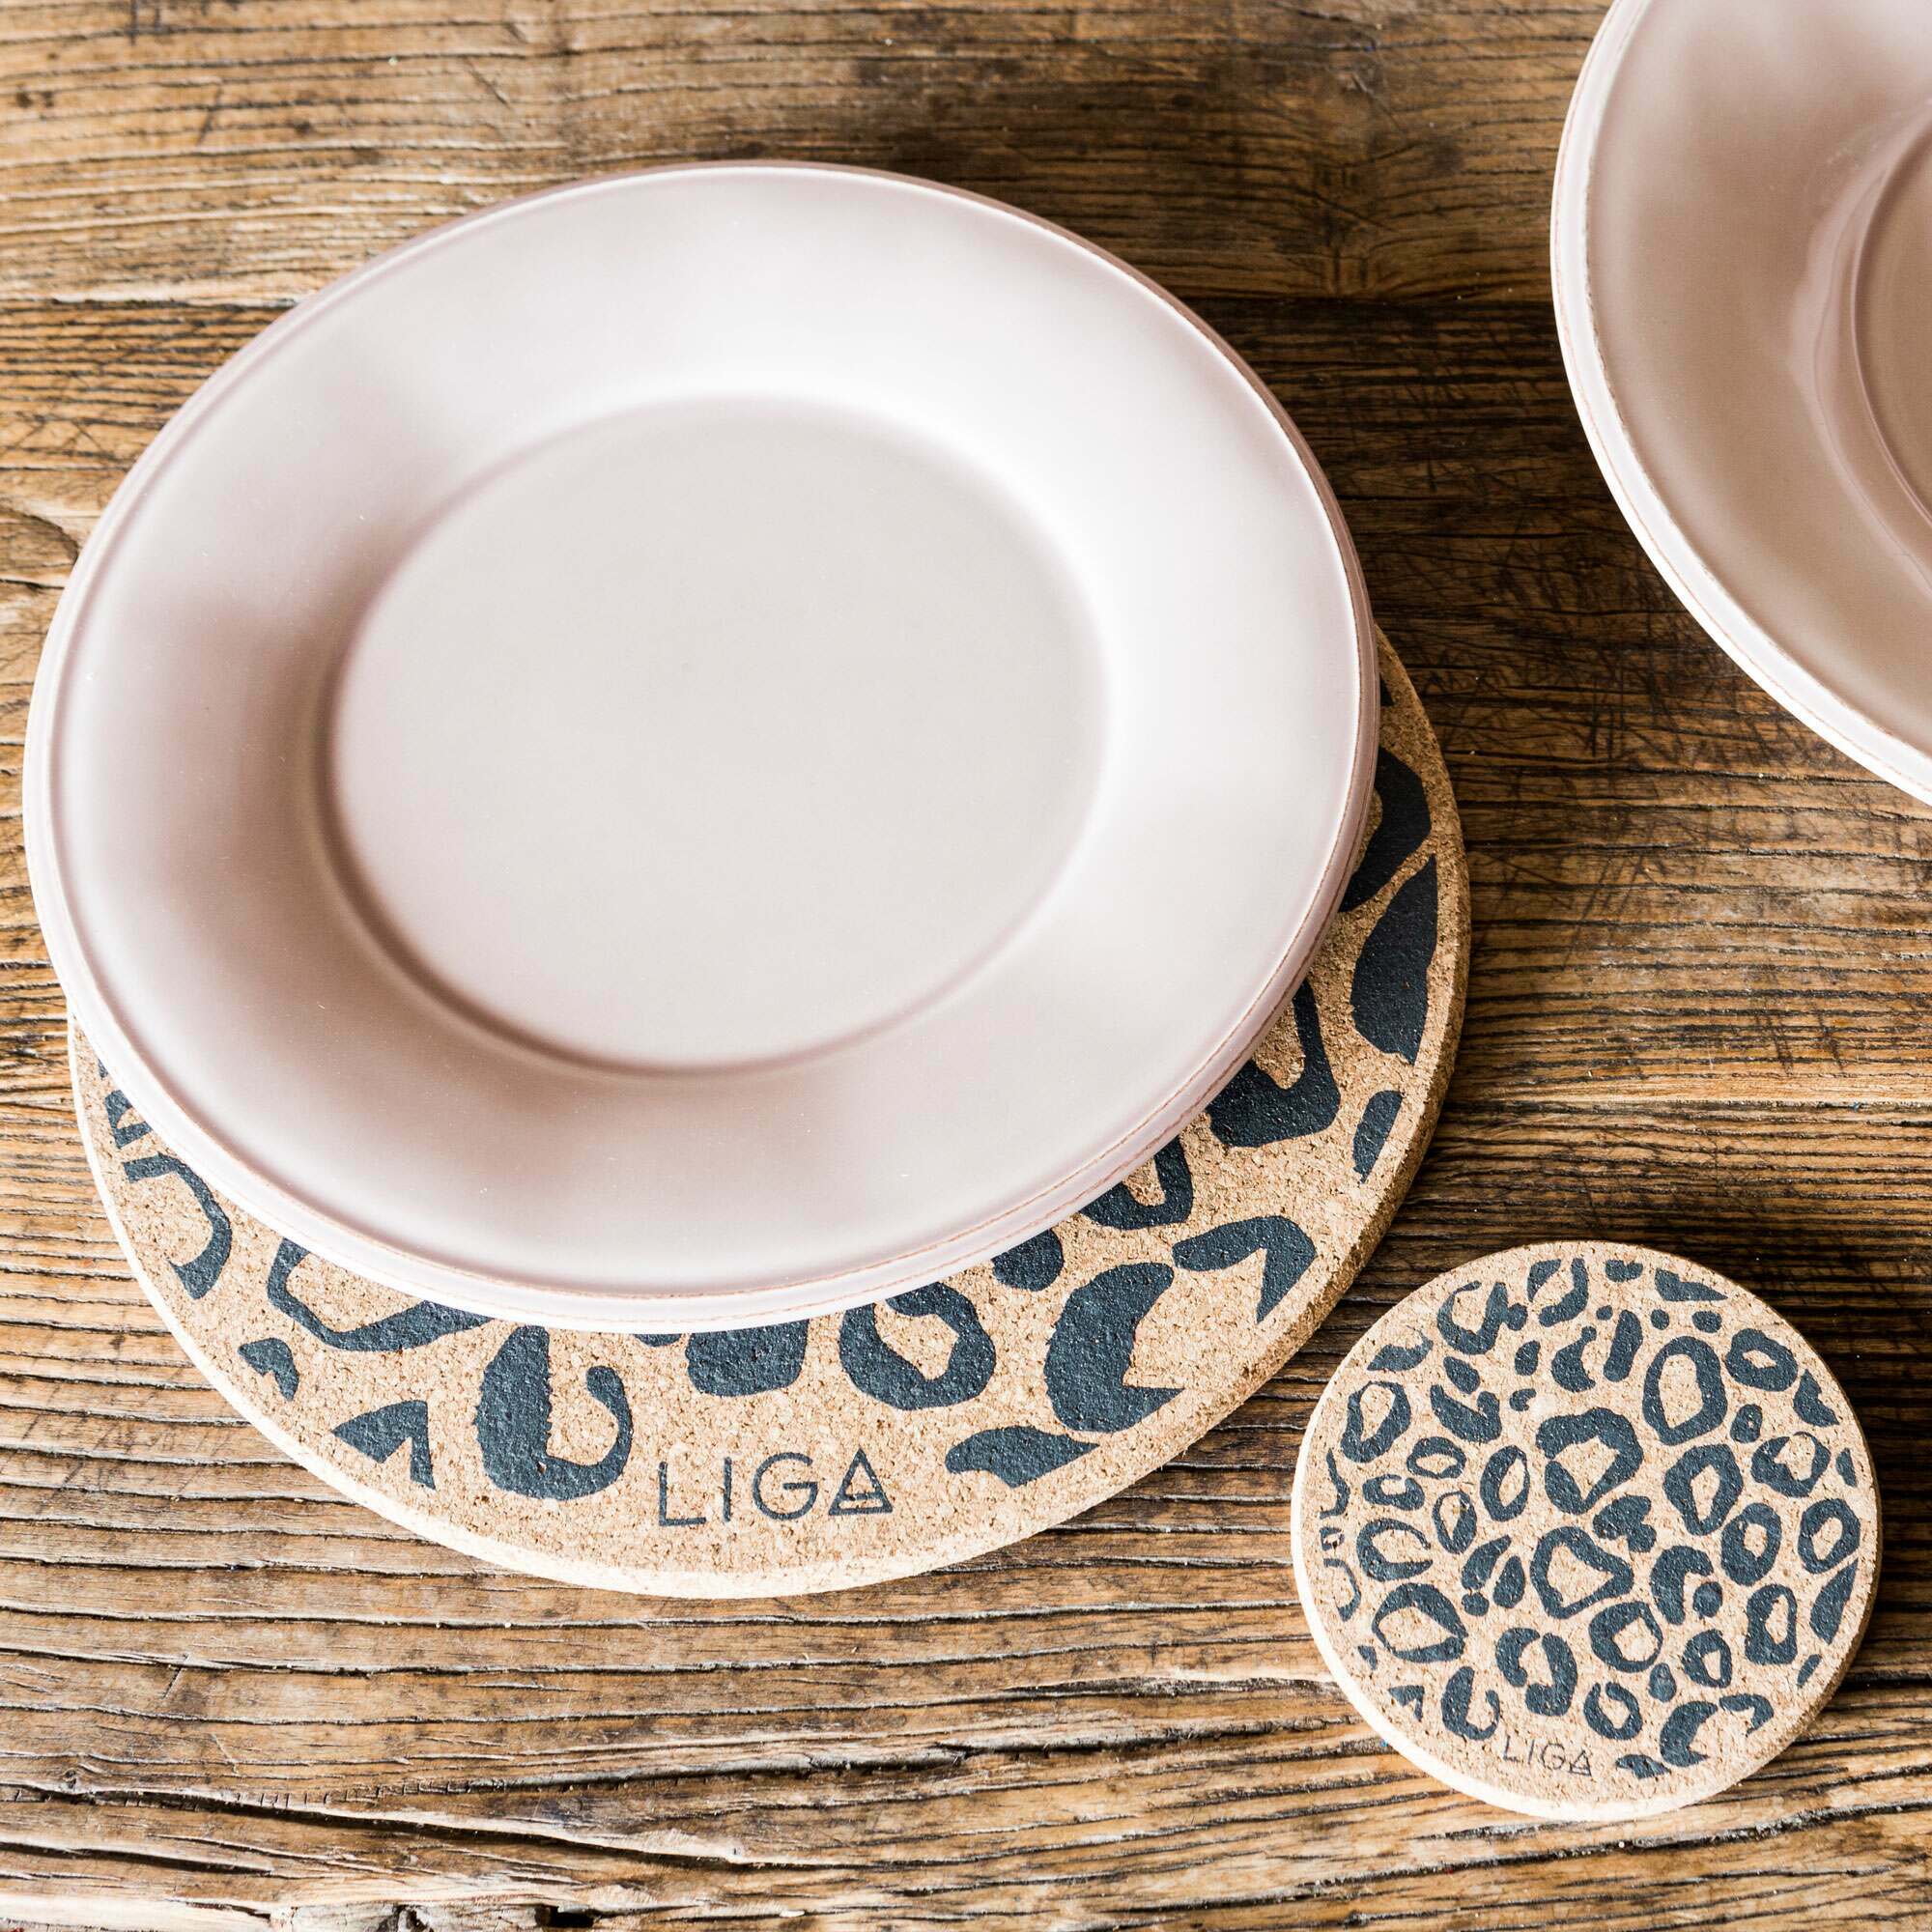 Read more about Graham and green cork leopard print placemat